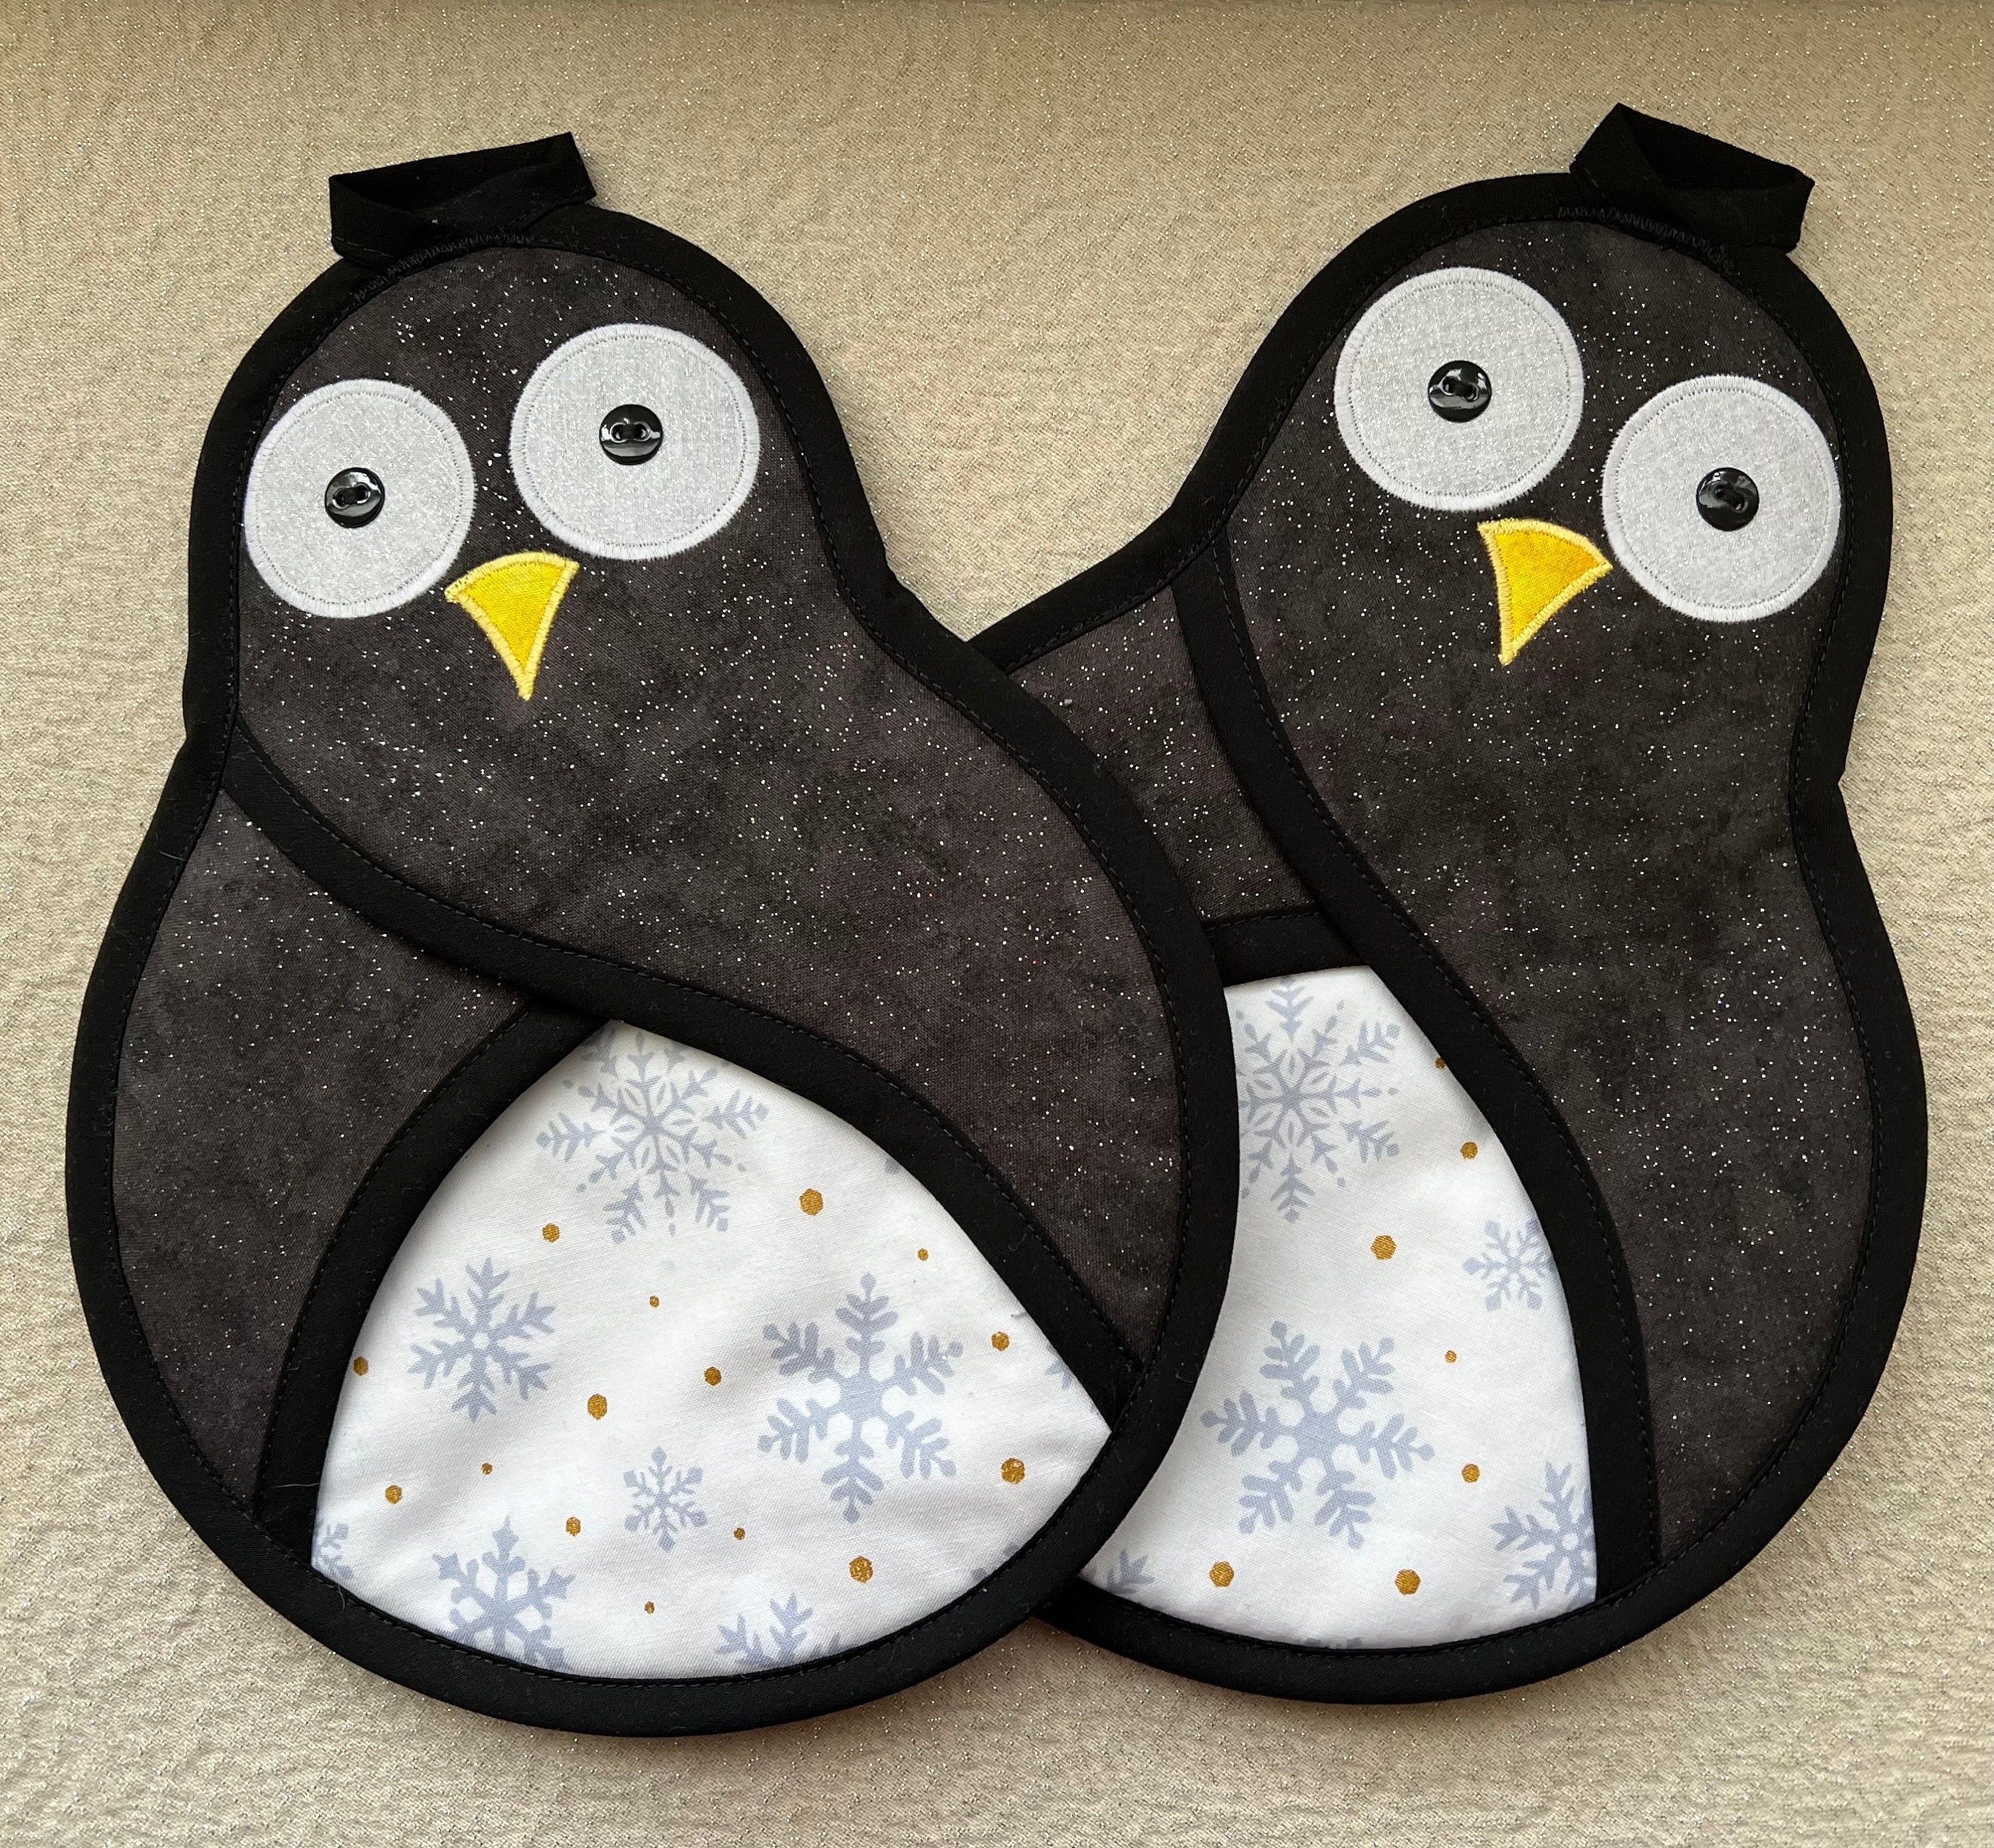 DouZhe Oven Mitts and Pot Holders Sets, Cartoon Cute Penguin Snow Animal  Prints Non-Slip Heat Resistant Kitchen Oven Silicone Glove